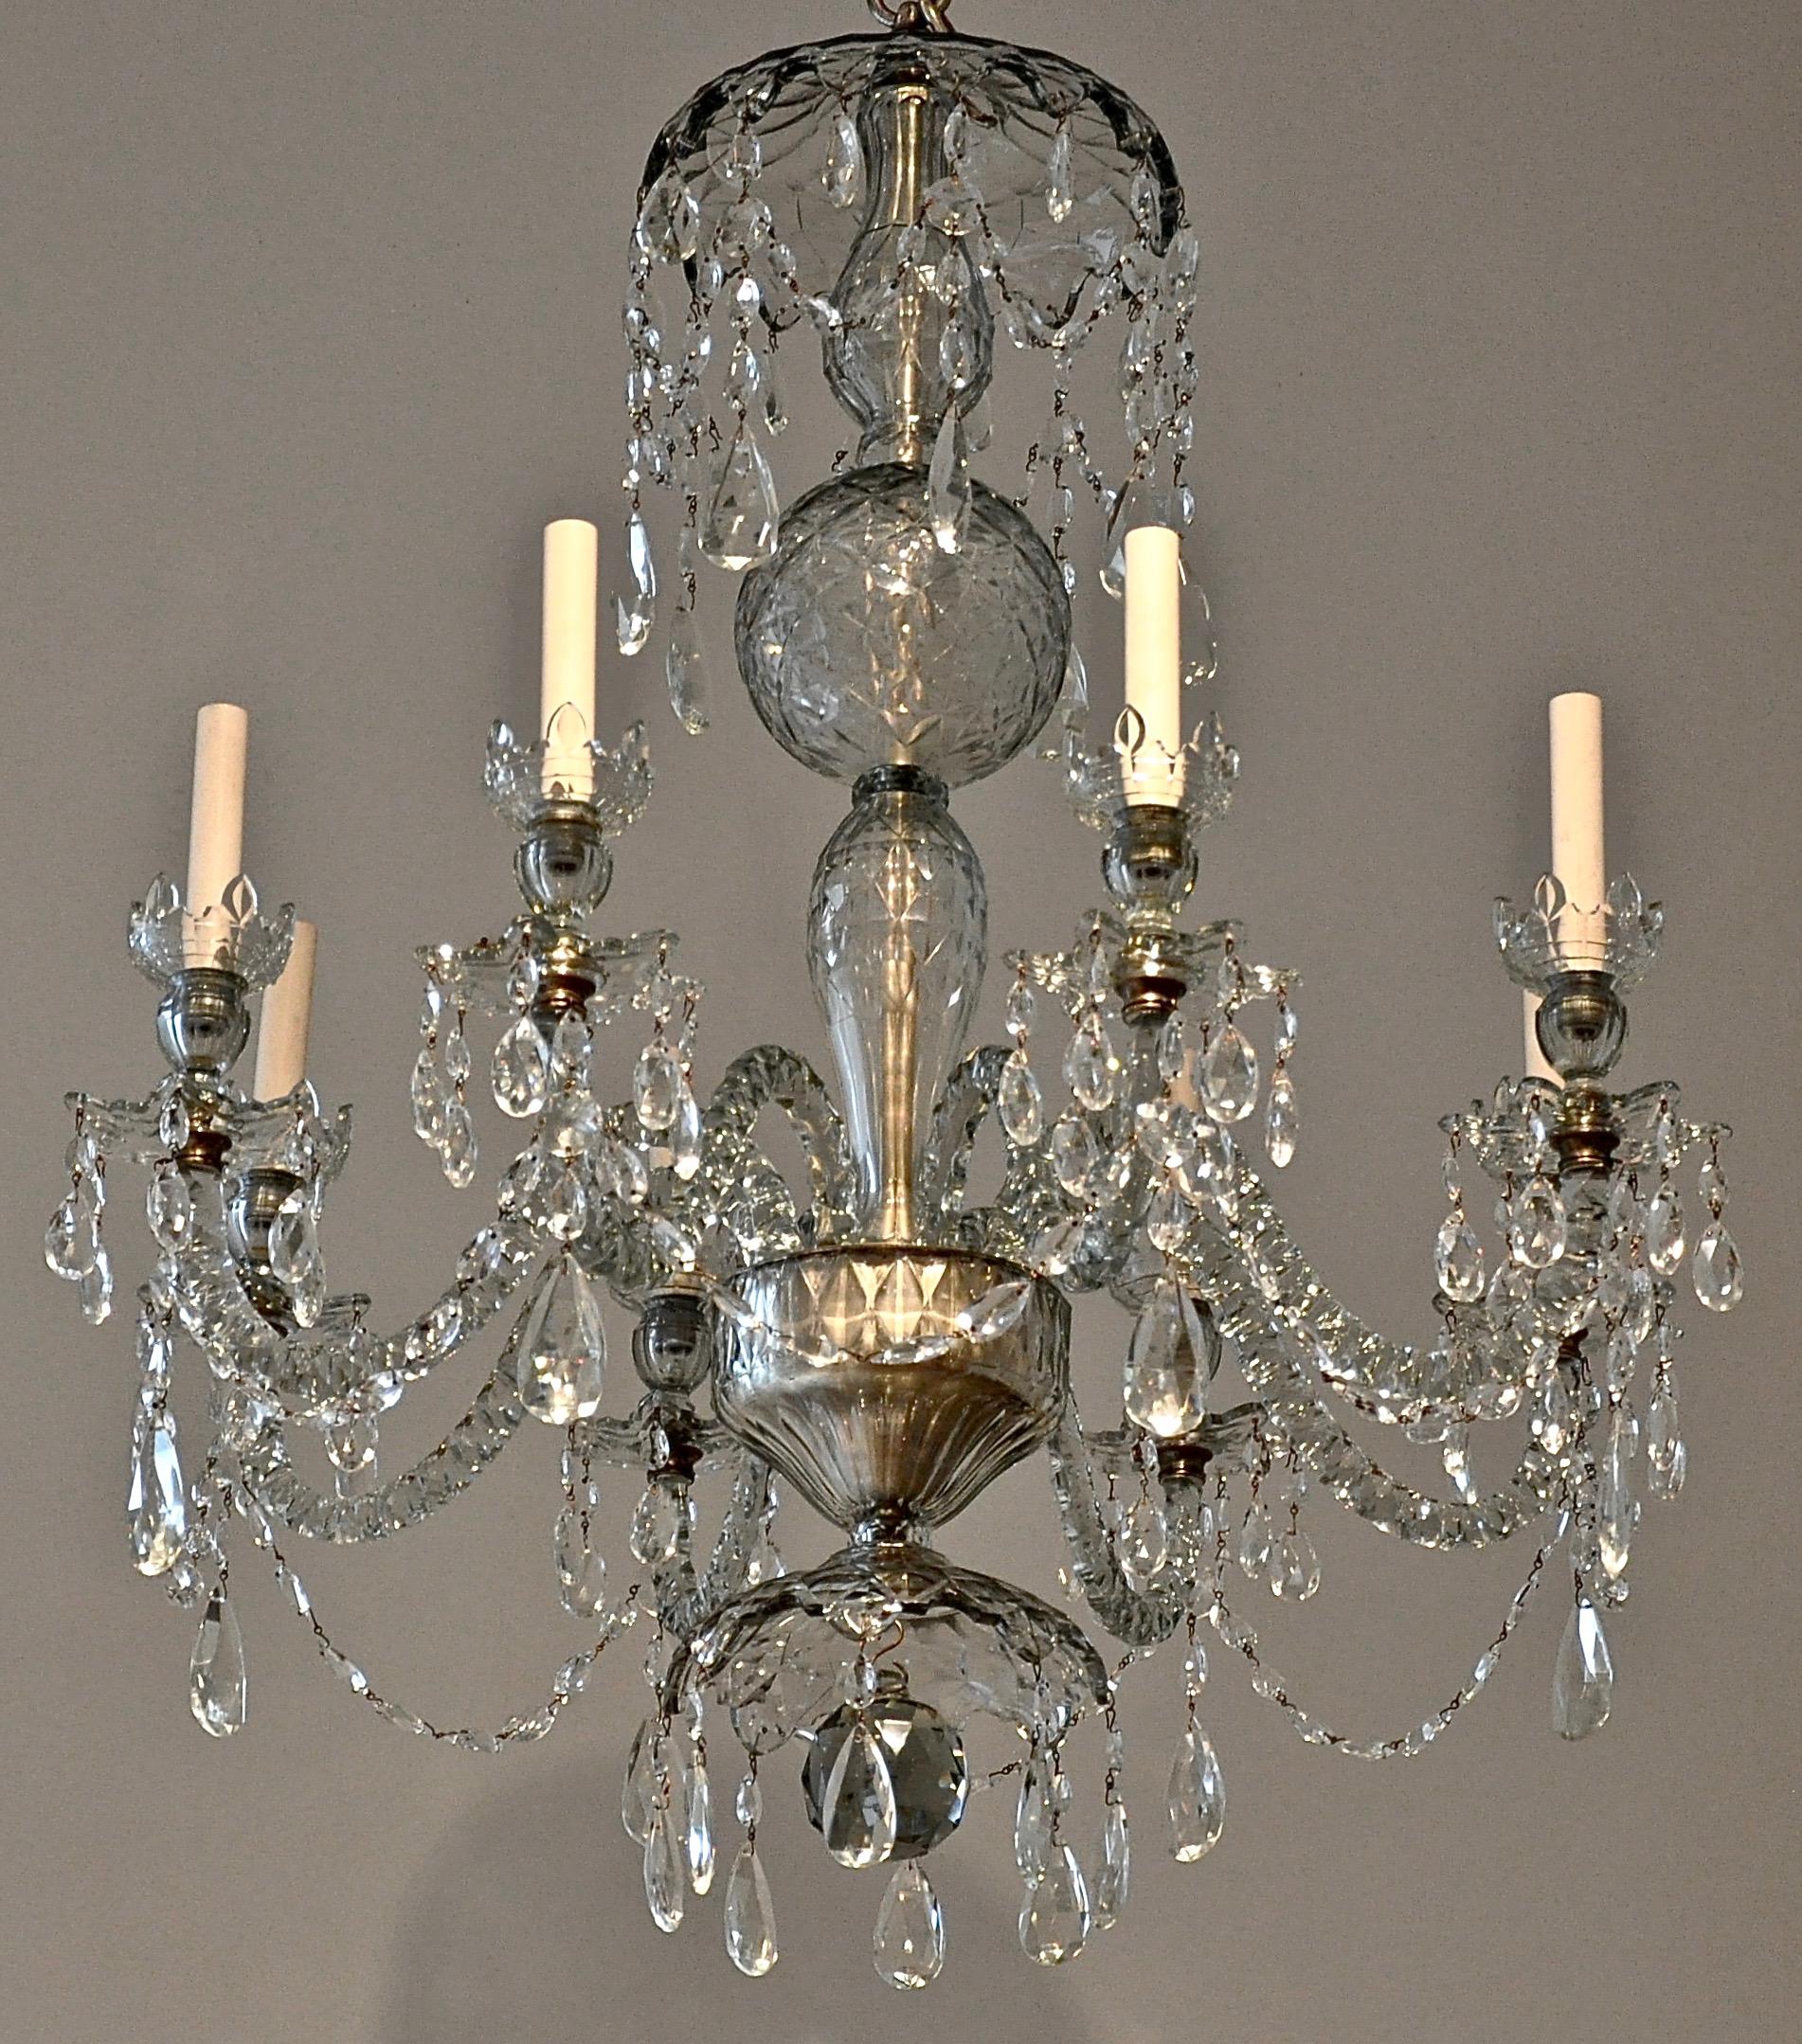 Mid-late 19th century Georgian style crystal chandelier.

-- County Cork Ireland
-- Bright cut crystal in period late 18th century fashion
-- Solid arms
-- No restorations
-- French wired.

Provenance: Charles J. Winston & Co., New York,